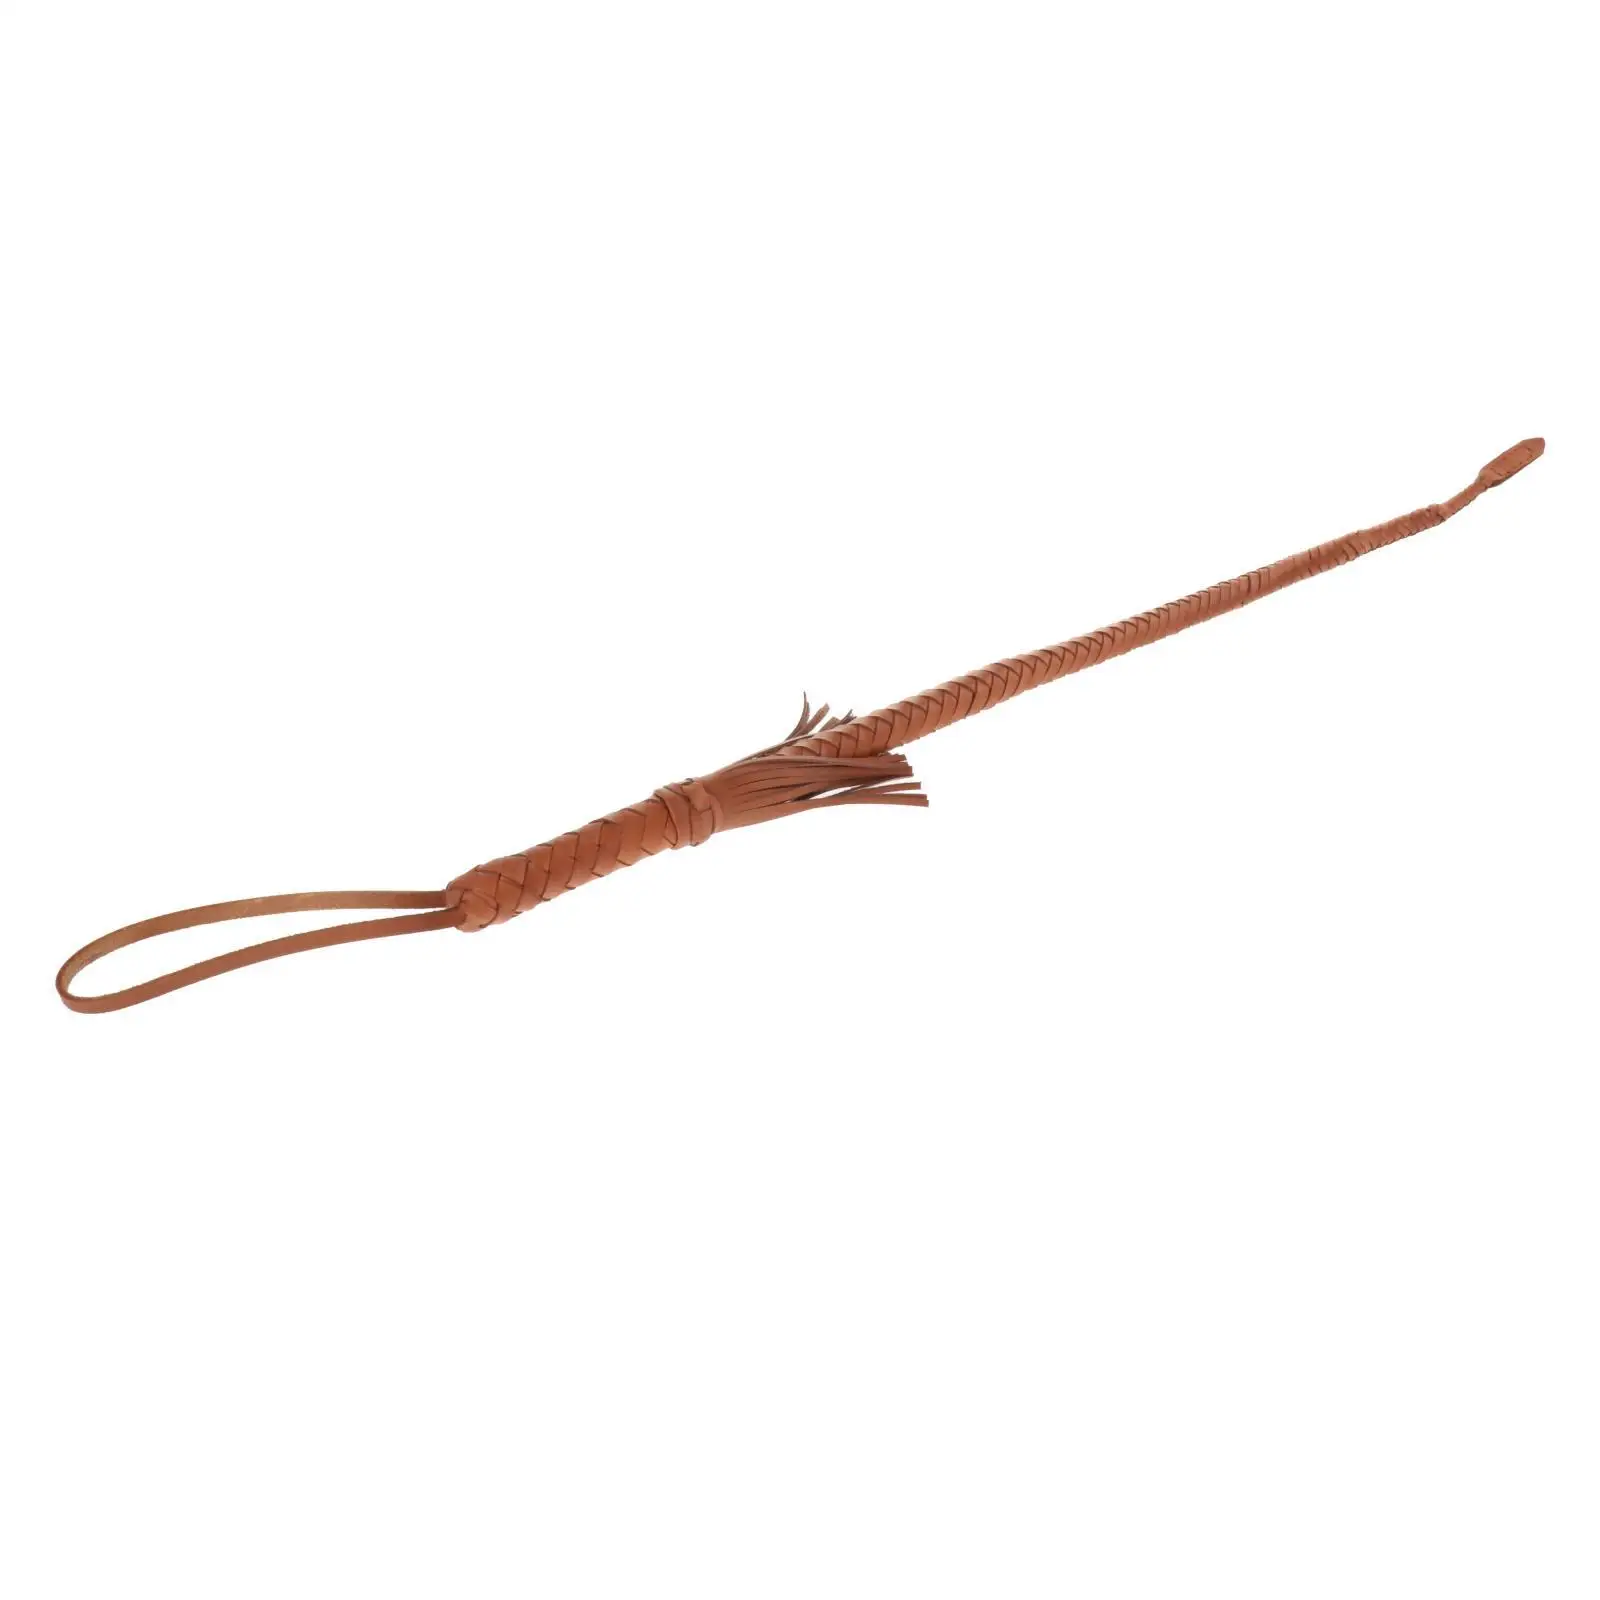 

Horsewhip Training Whip 31.5" Premium Quality Accessories Riding Crop for Riding